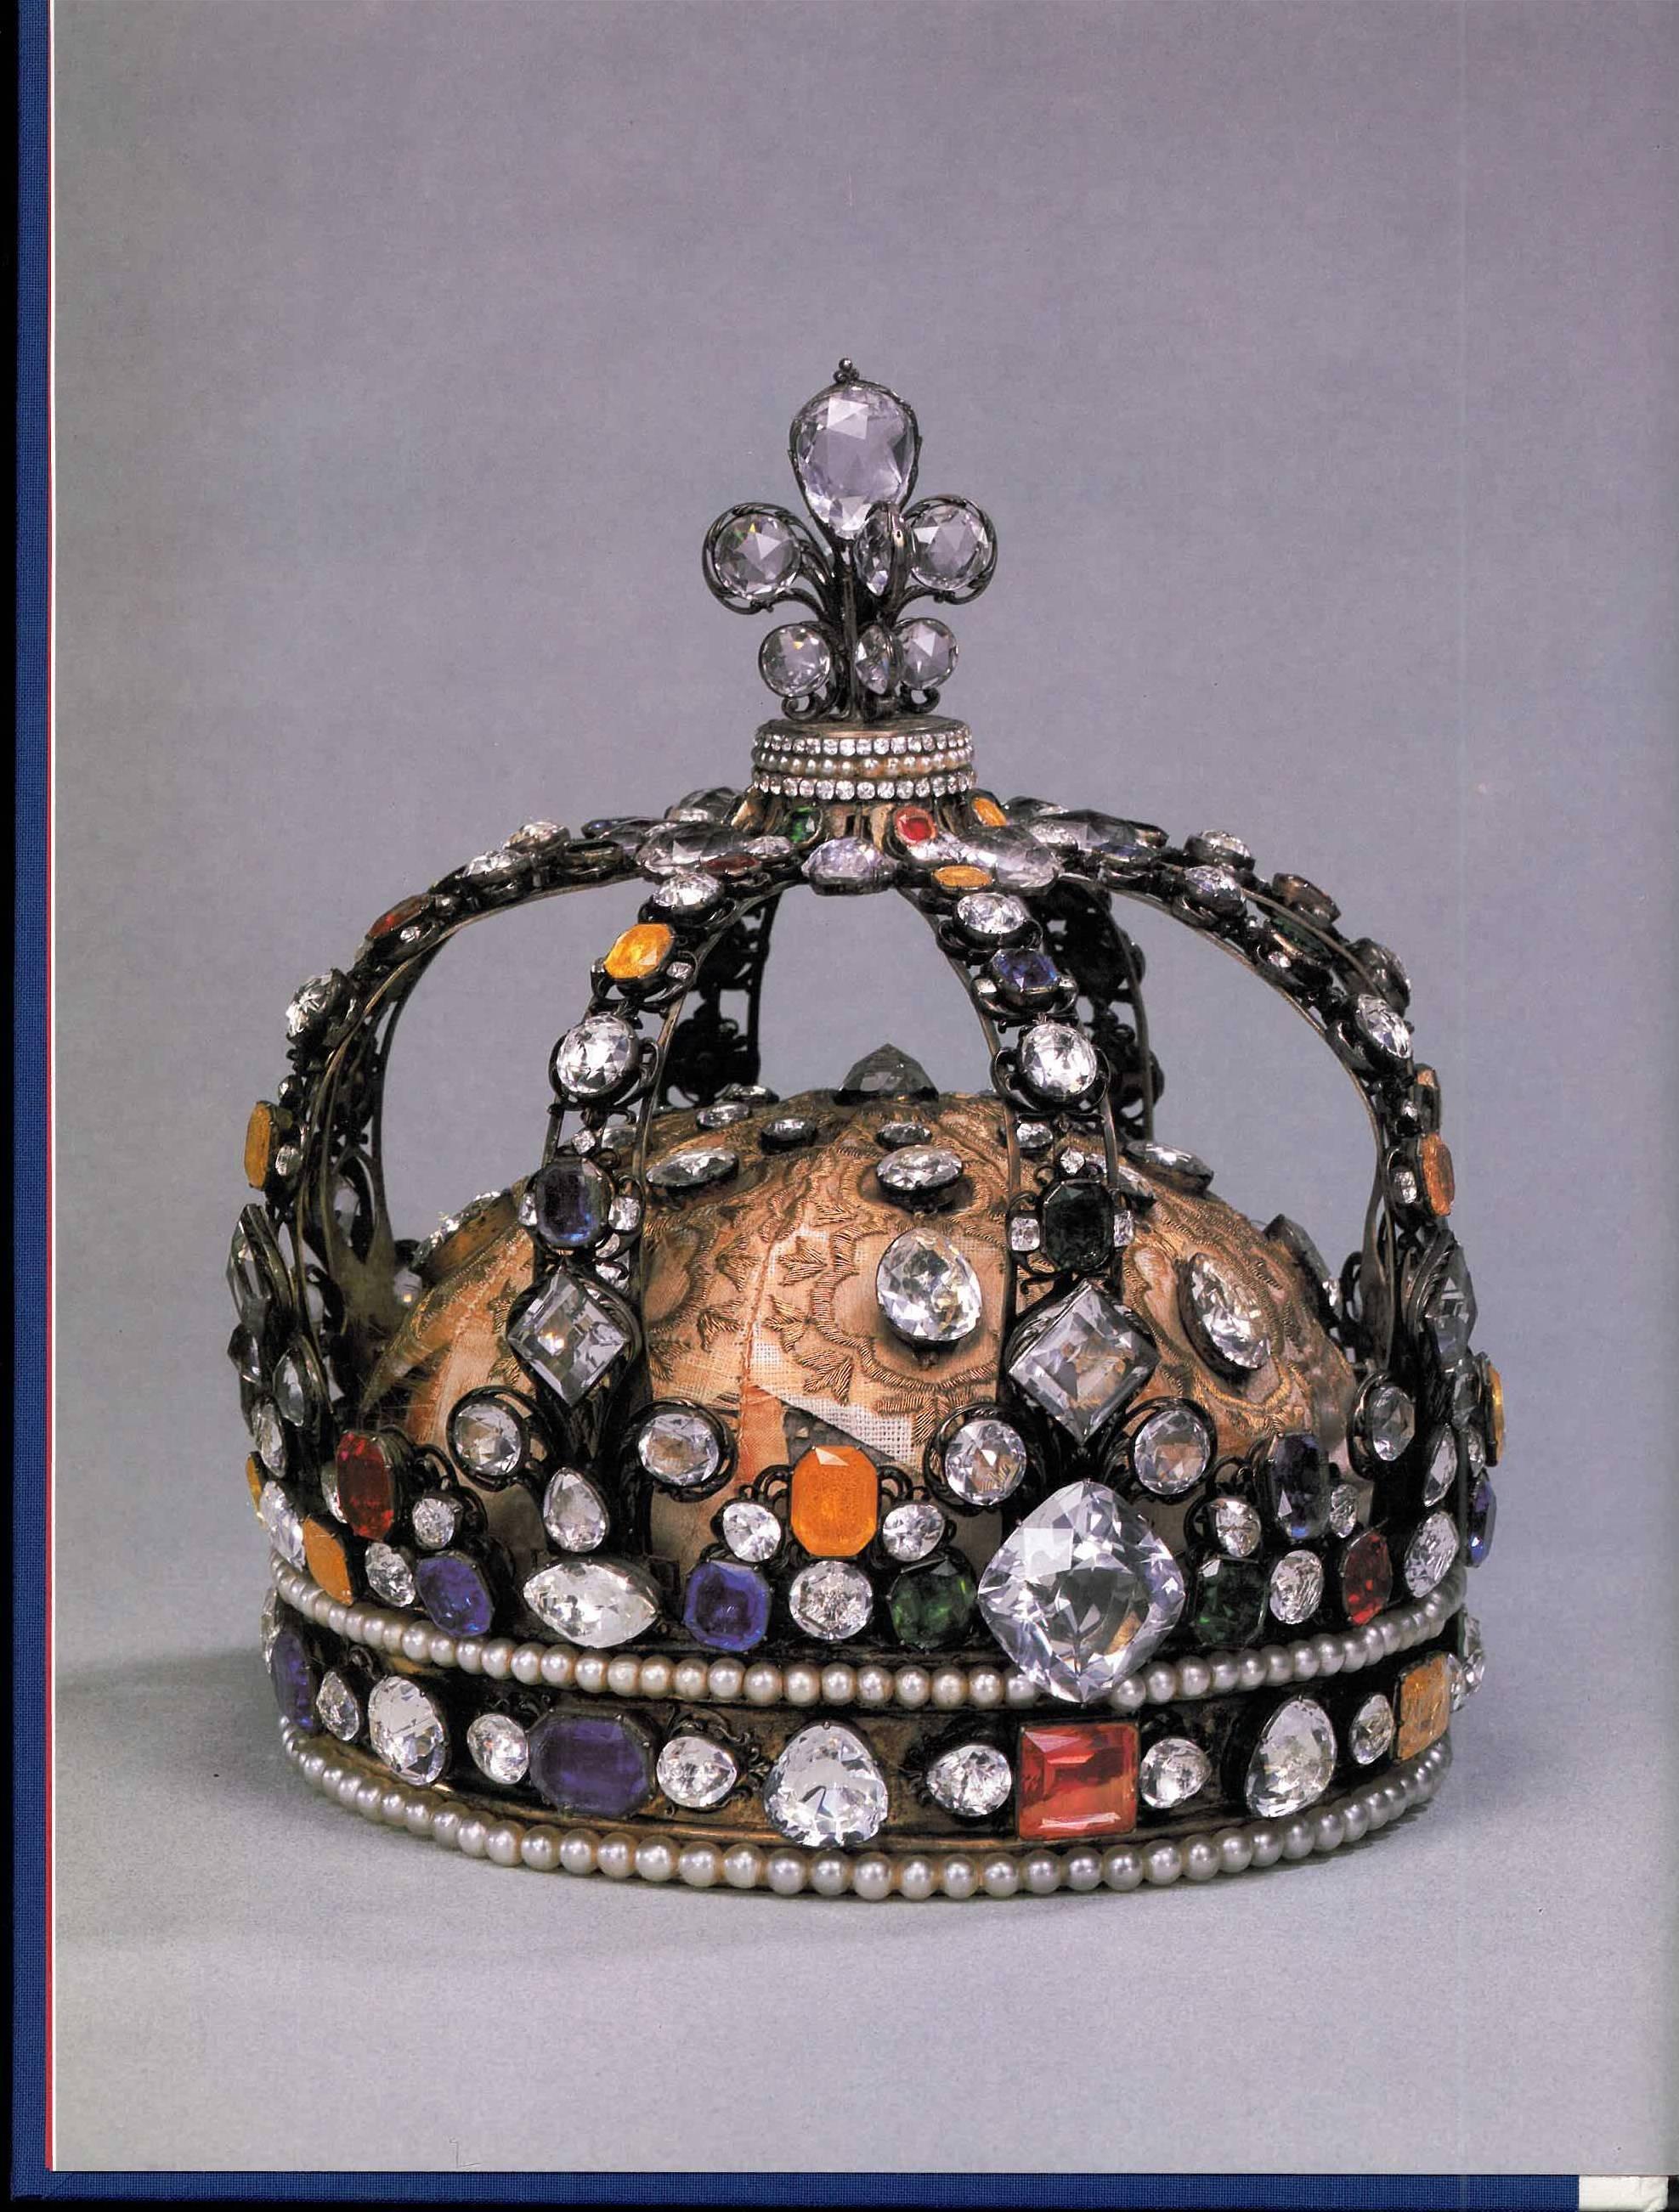 This is a beautiful hard back book which was published in 1988 - retains original dust jacket and slip case. Ten centuries of history are covered following the marvellous jewels of the French Monarchy. There is a distinction in France between the